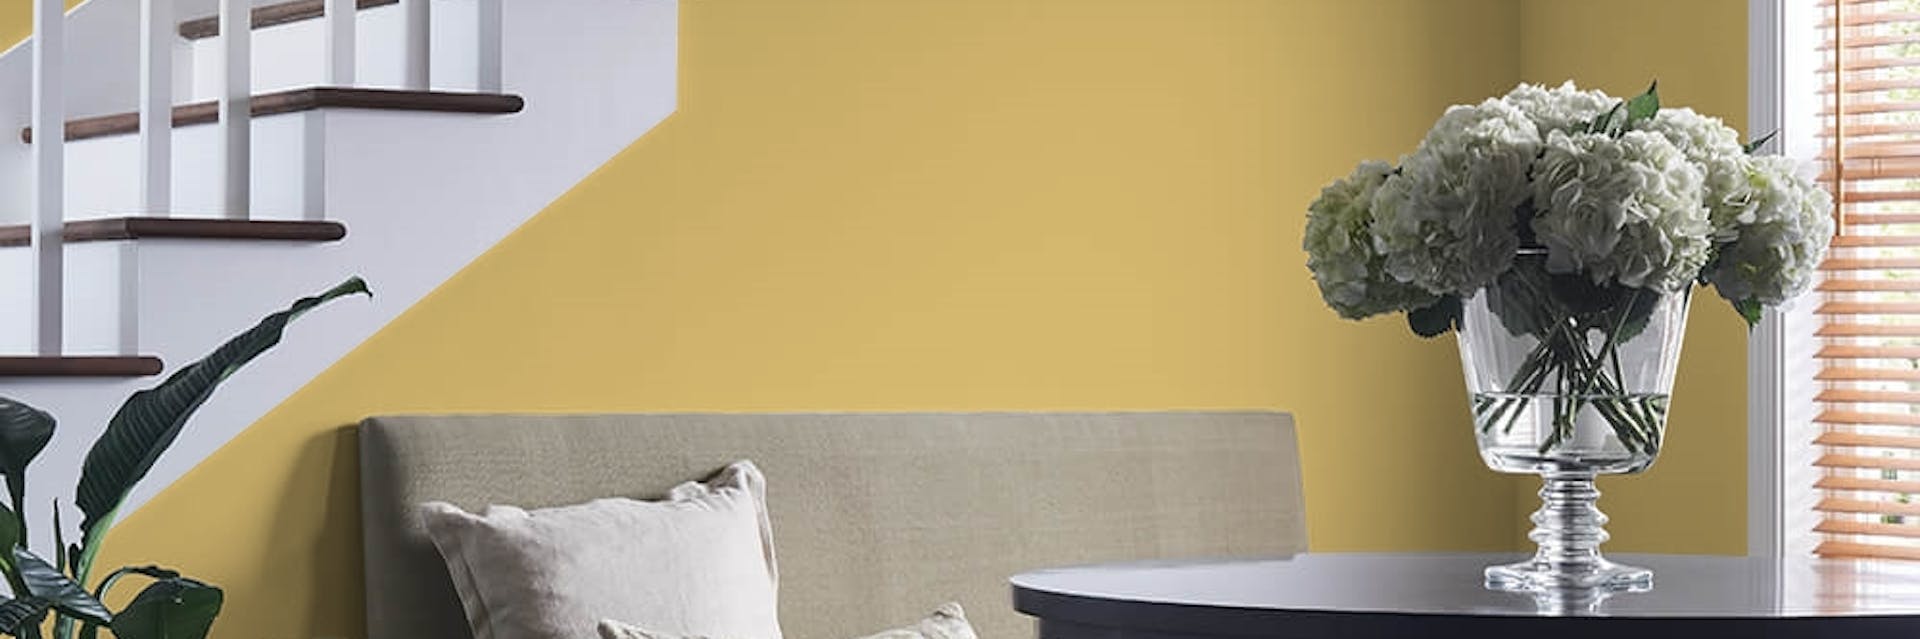 Wall painted in a warm yellow paint colour 